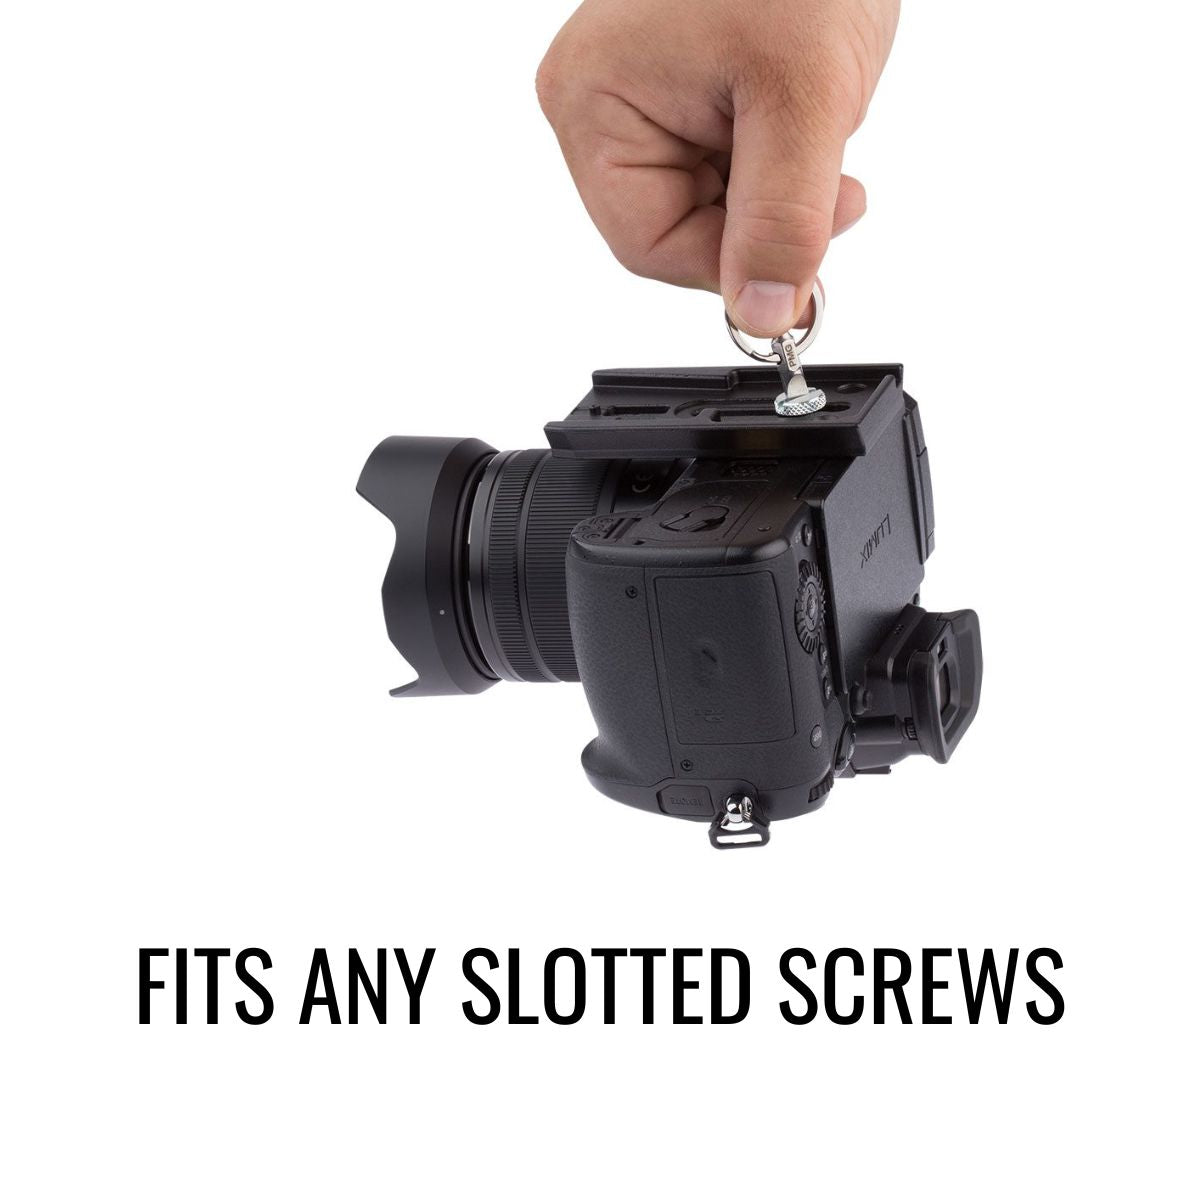 for any slotted screws